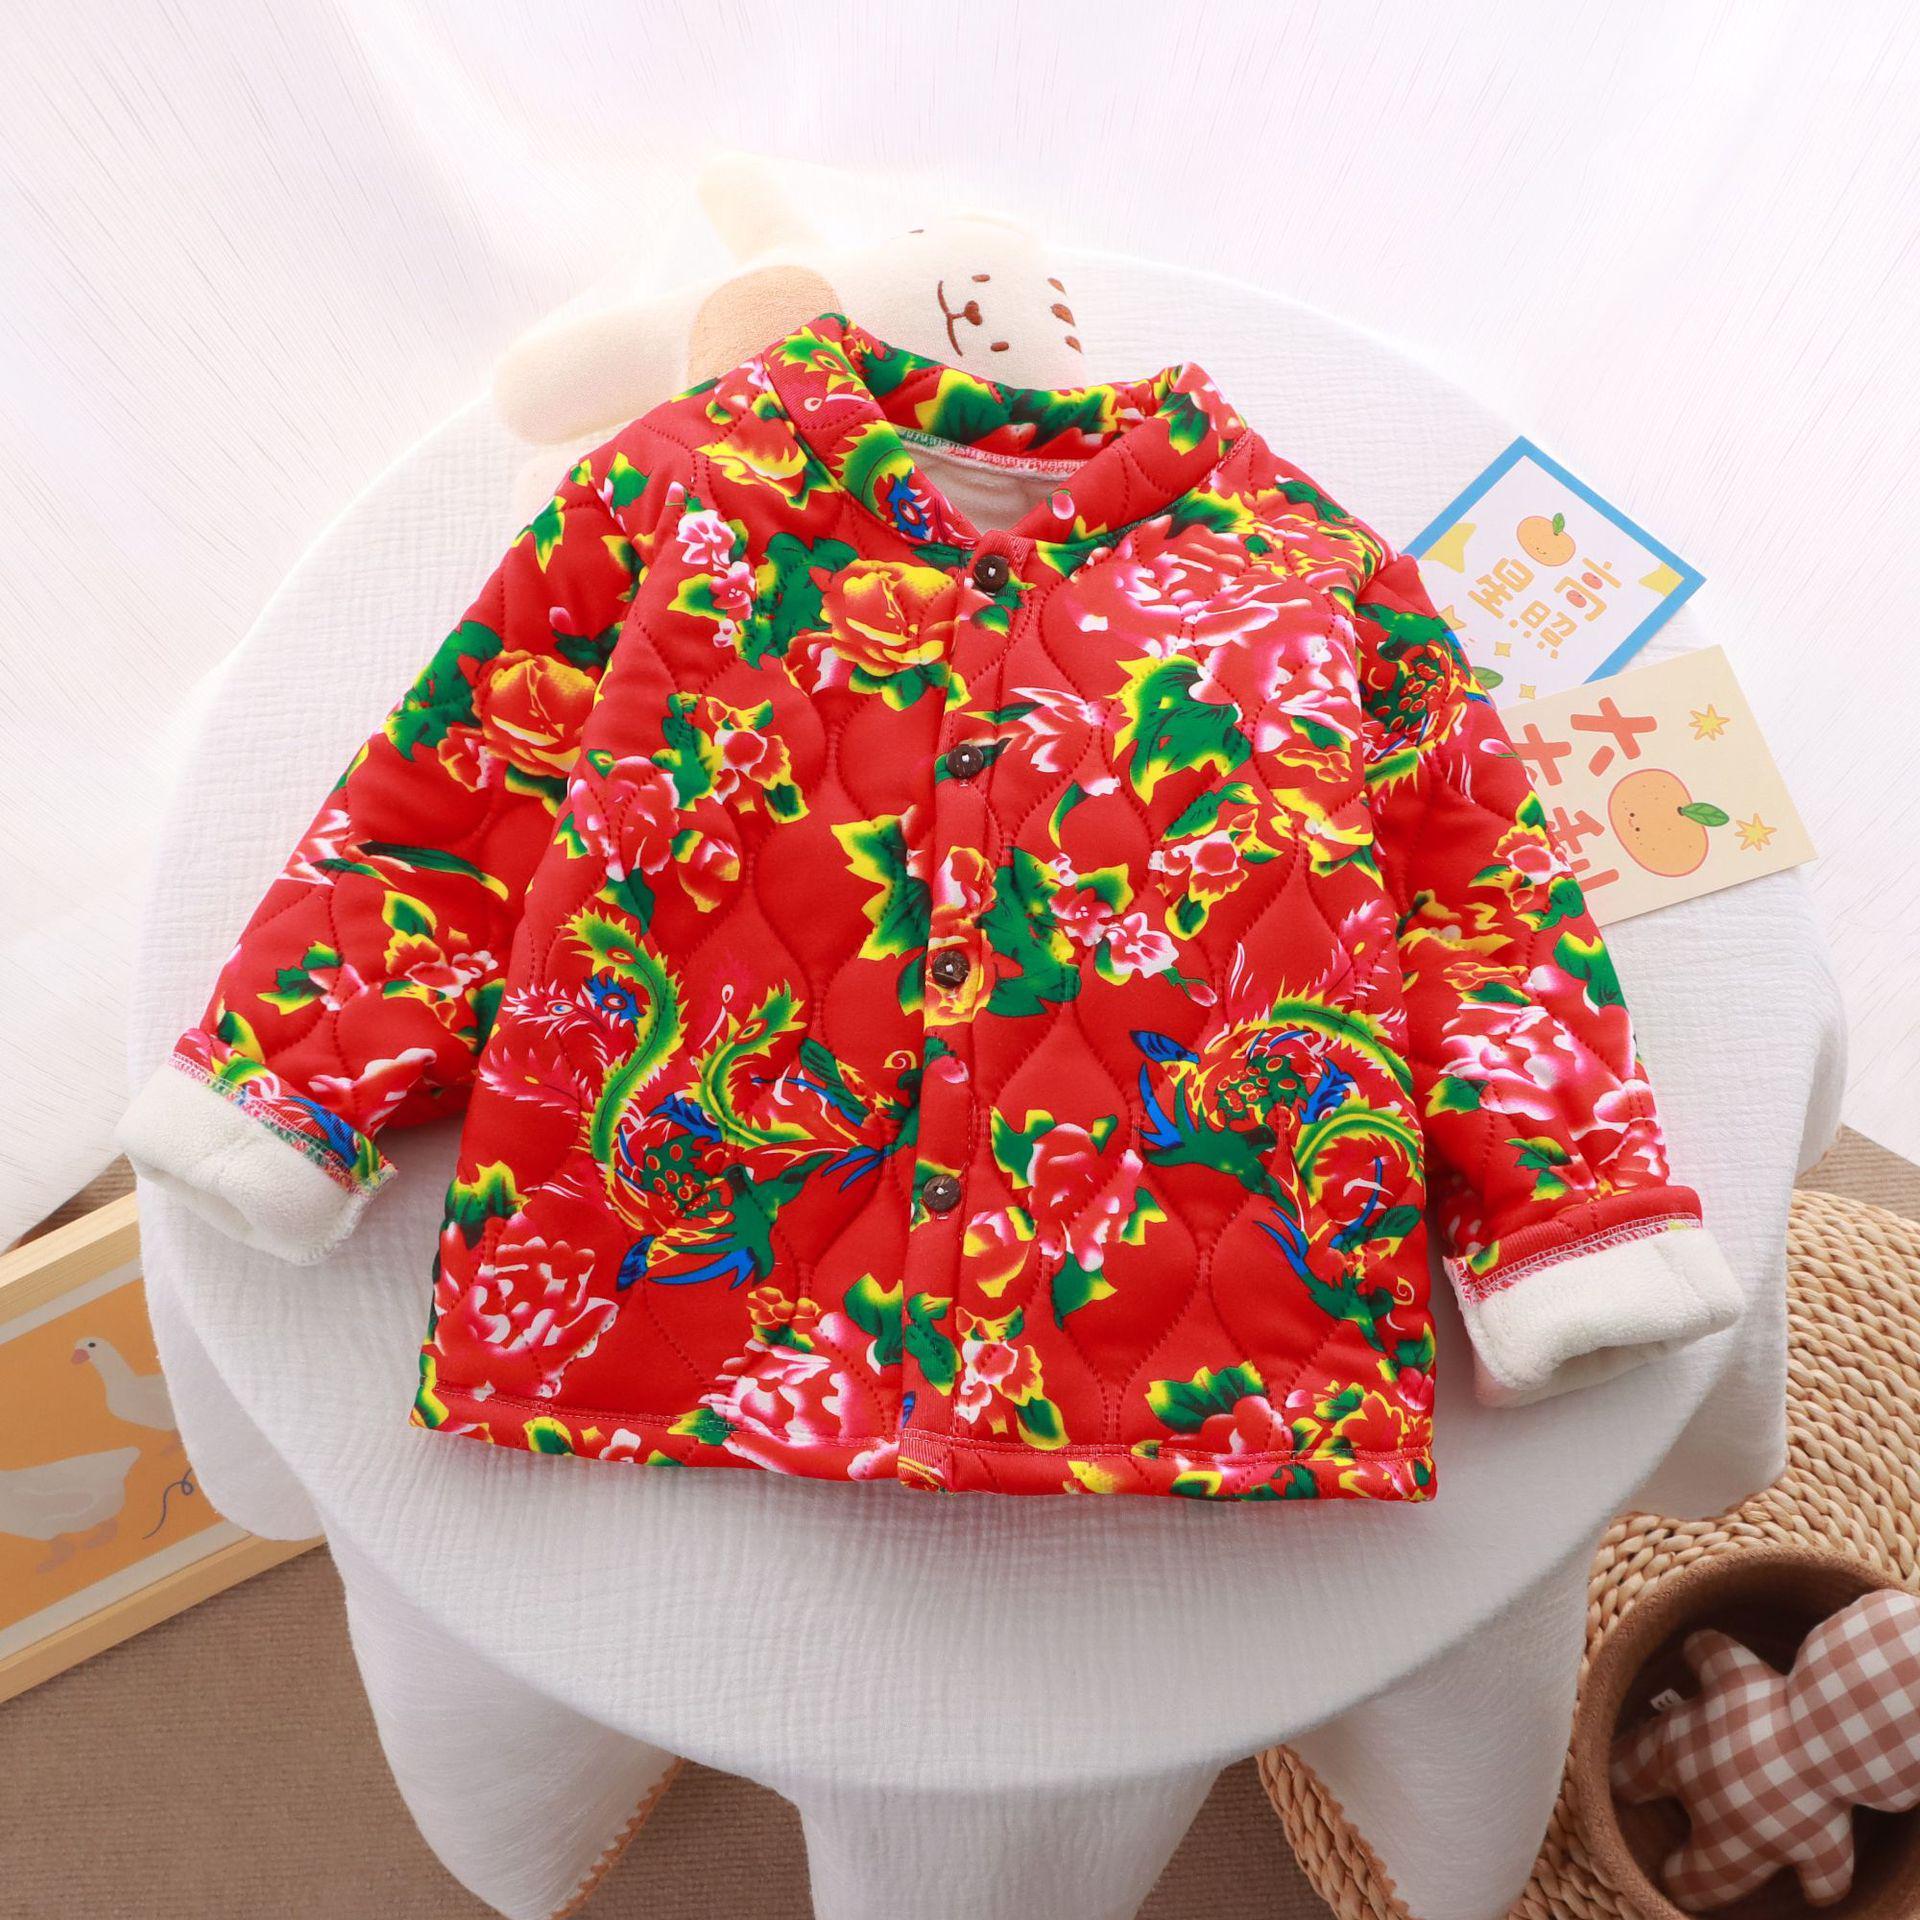 Children's floral cotton-padded jackets, thickened cotton-padded jackets, ethnic style boys and girls' small coats, trendy street-style national dynasty floral cotton-padded jackets